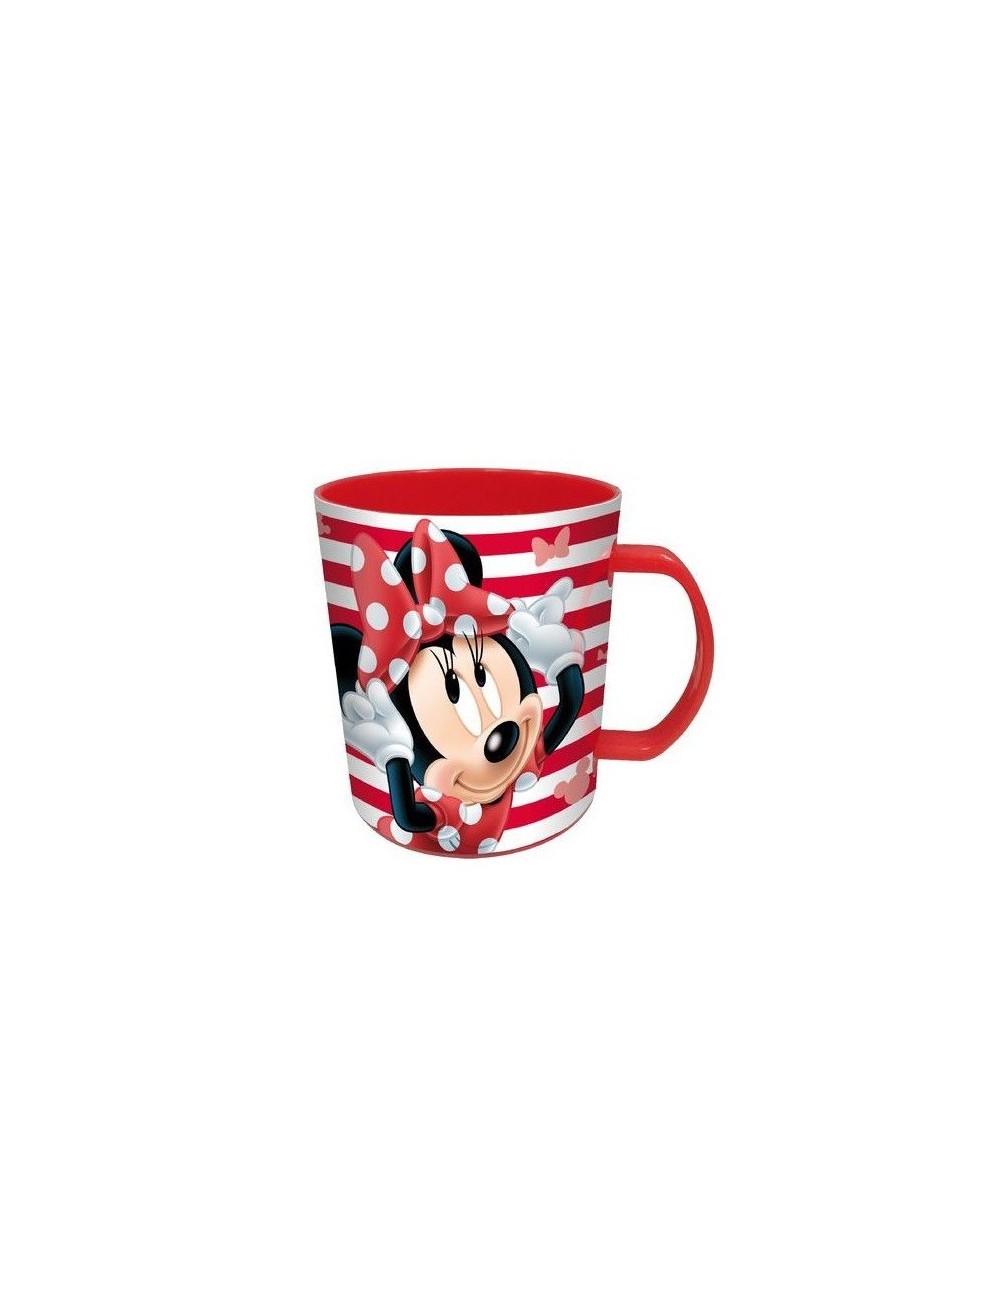 Cana Minnie Mouse, plastic, microunde, 350 ml